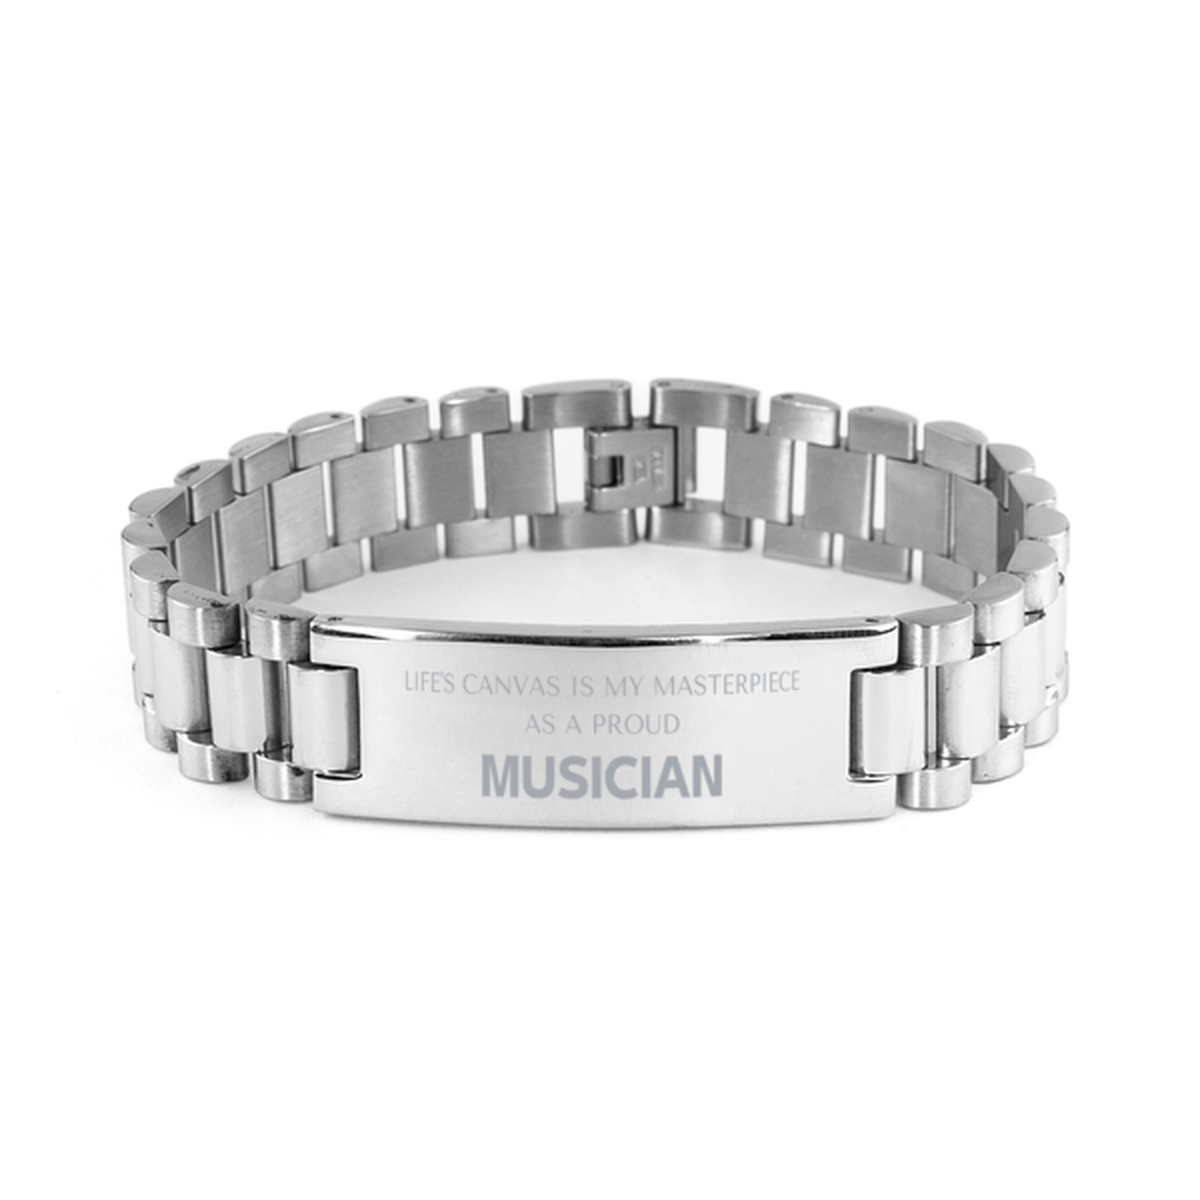 Proud Musician Gifts, Life's canvas is my masterpiece, Epic Birthday Christmas Unique Ladder Stainless Steel Bracelet For Musician, Coworkers, Men, Women, Friends